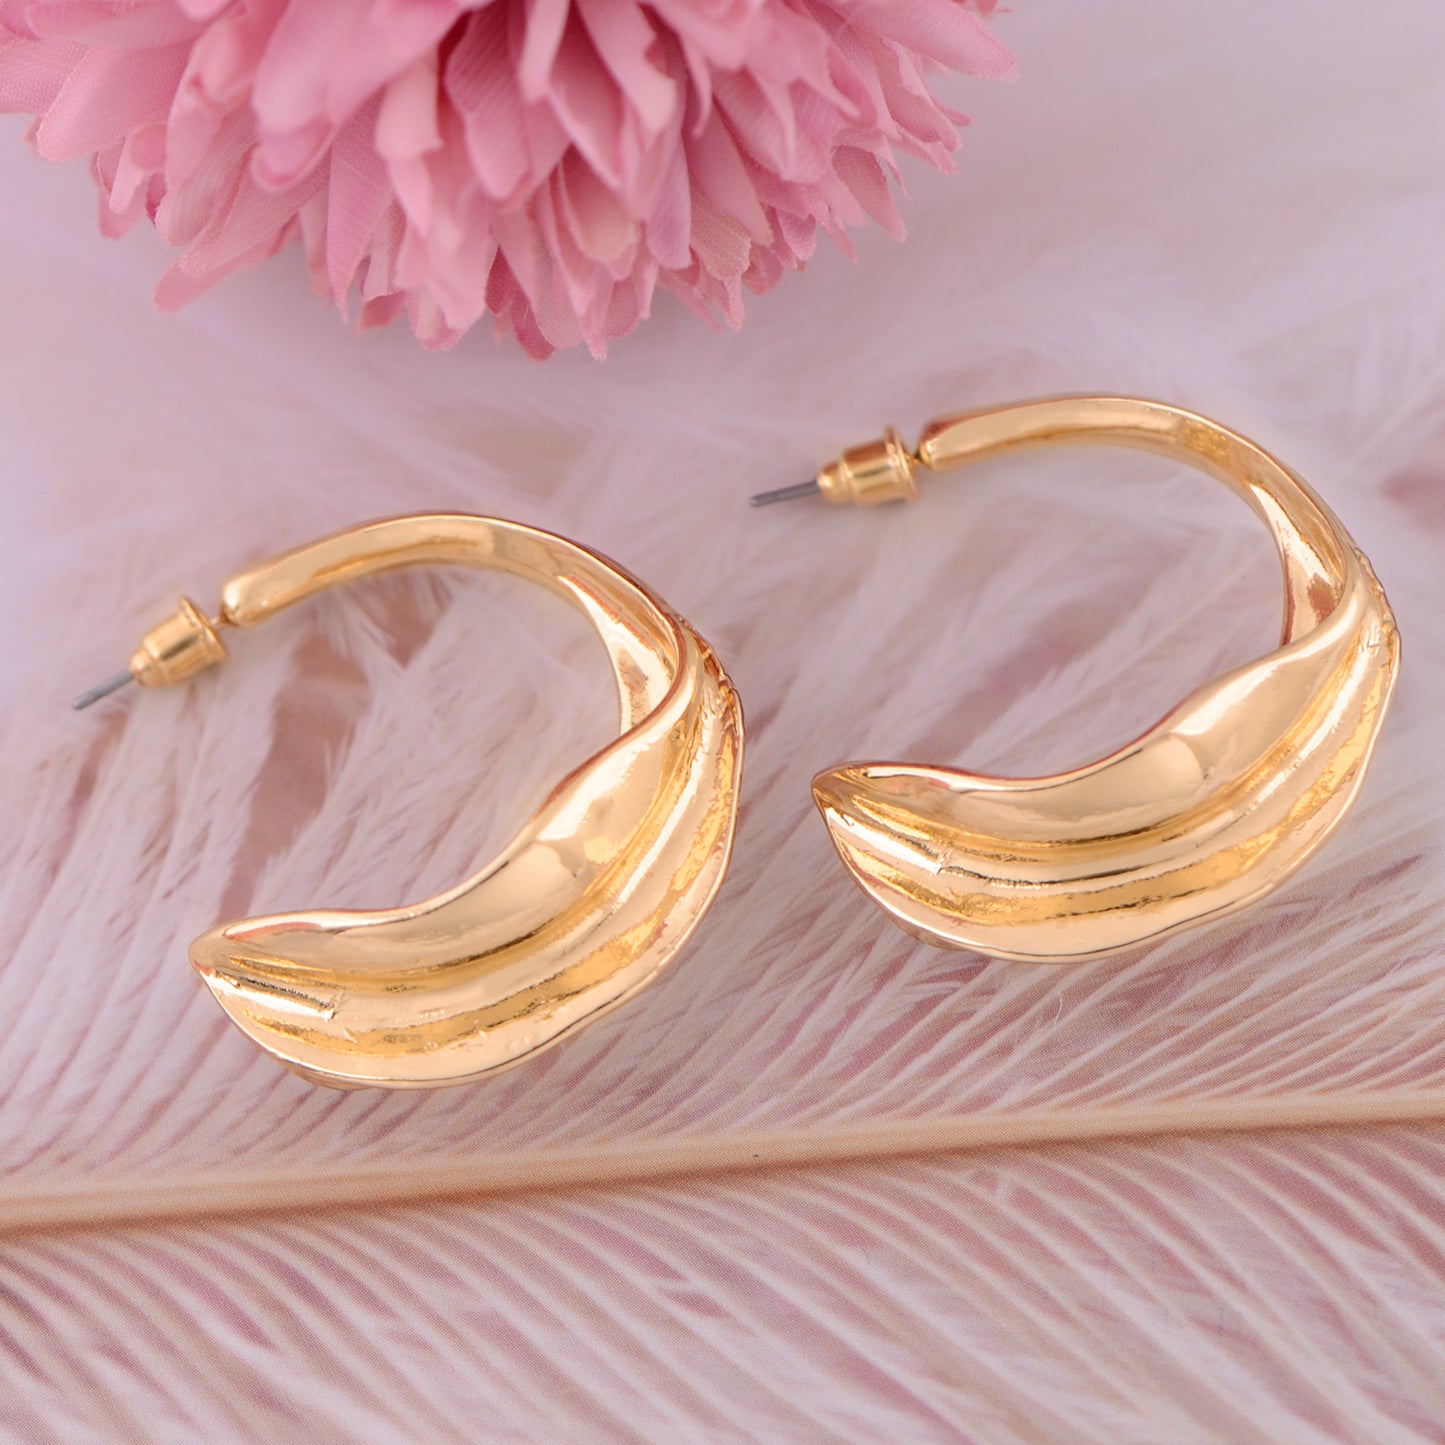 Alilang 14K Gold Plated Chunky Open Hoop Earrings with 925 Sterling Silver Post for Women Girls